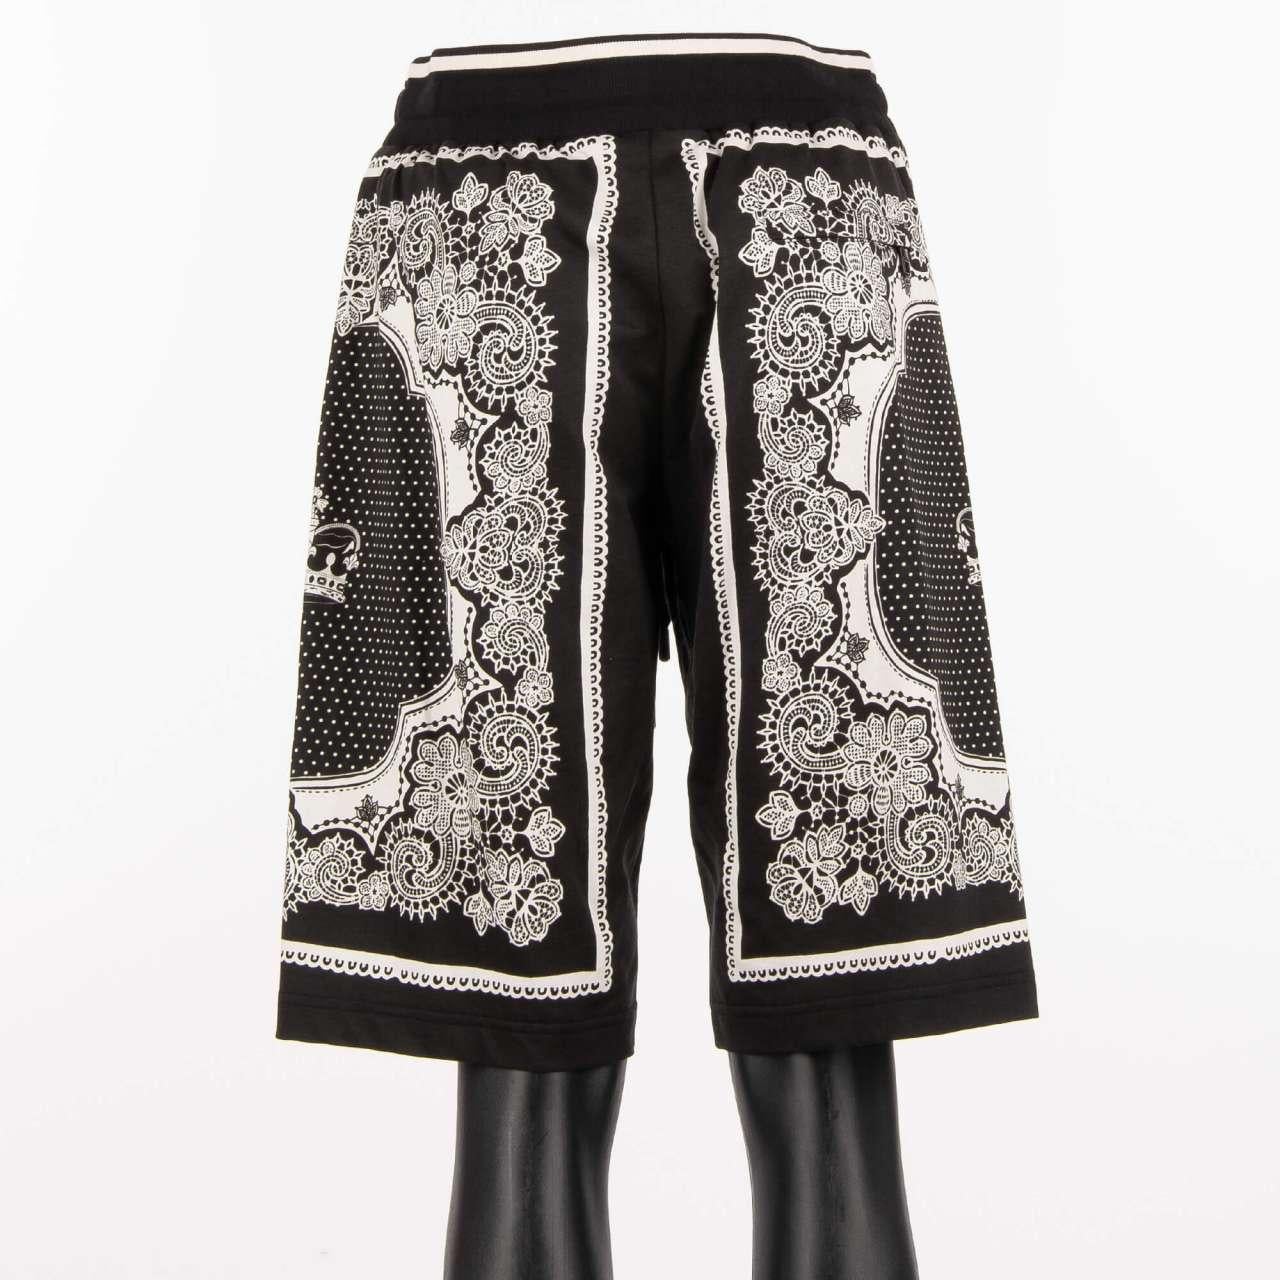 D&G - Cotton Sweatshorts with Bandana Crown Print and Pockets Black White 48 M In Excellent Condition For Sale In Erkrath, DE